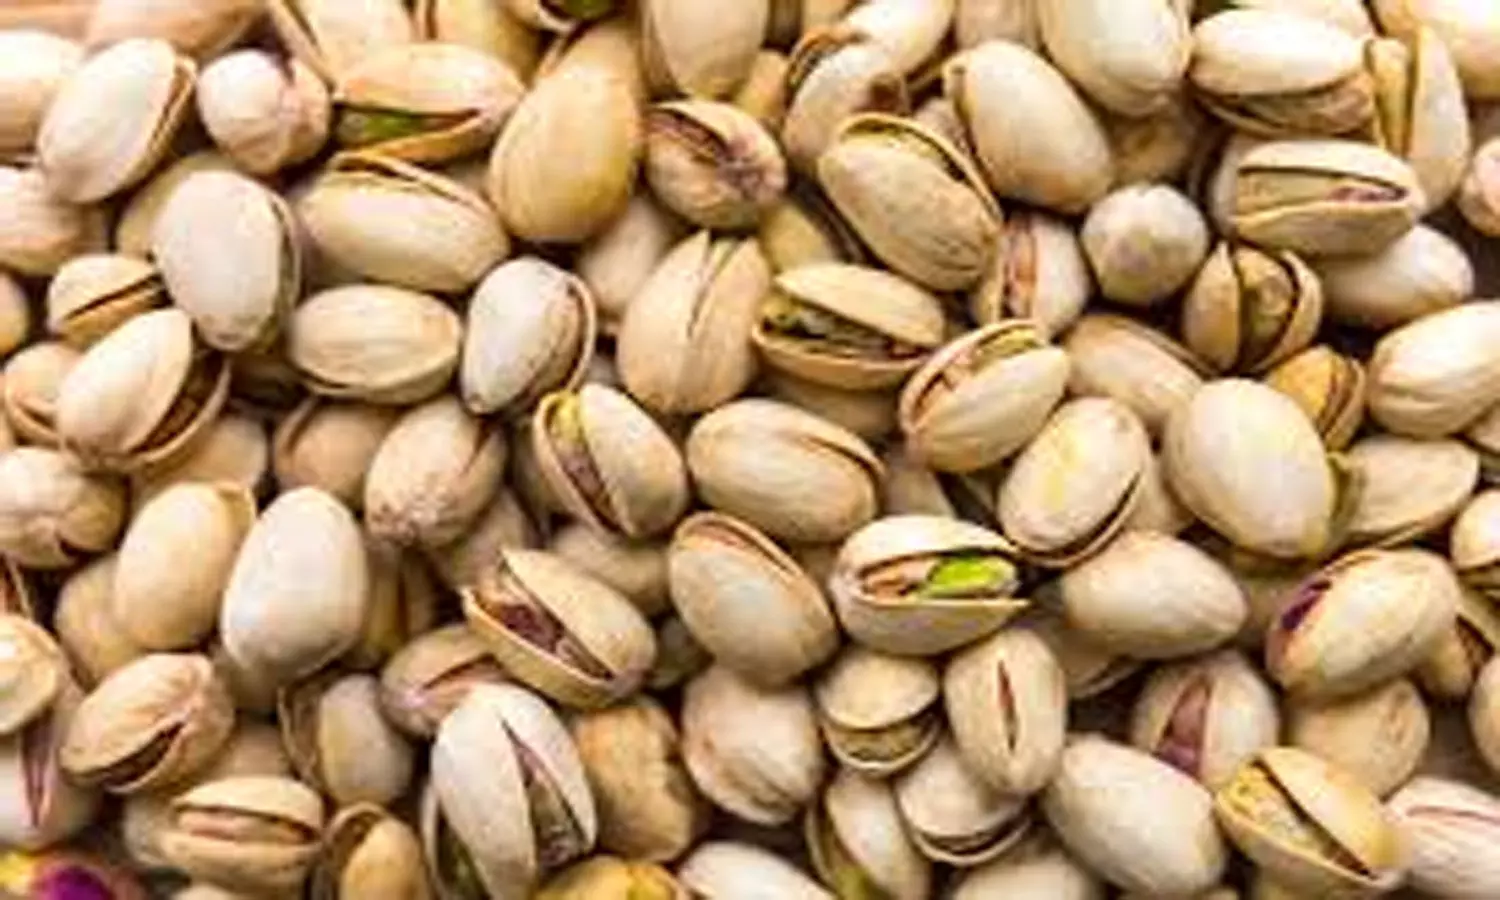 Eating pistachios may lower high BP and effect weight loss, finds study